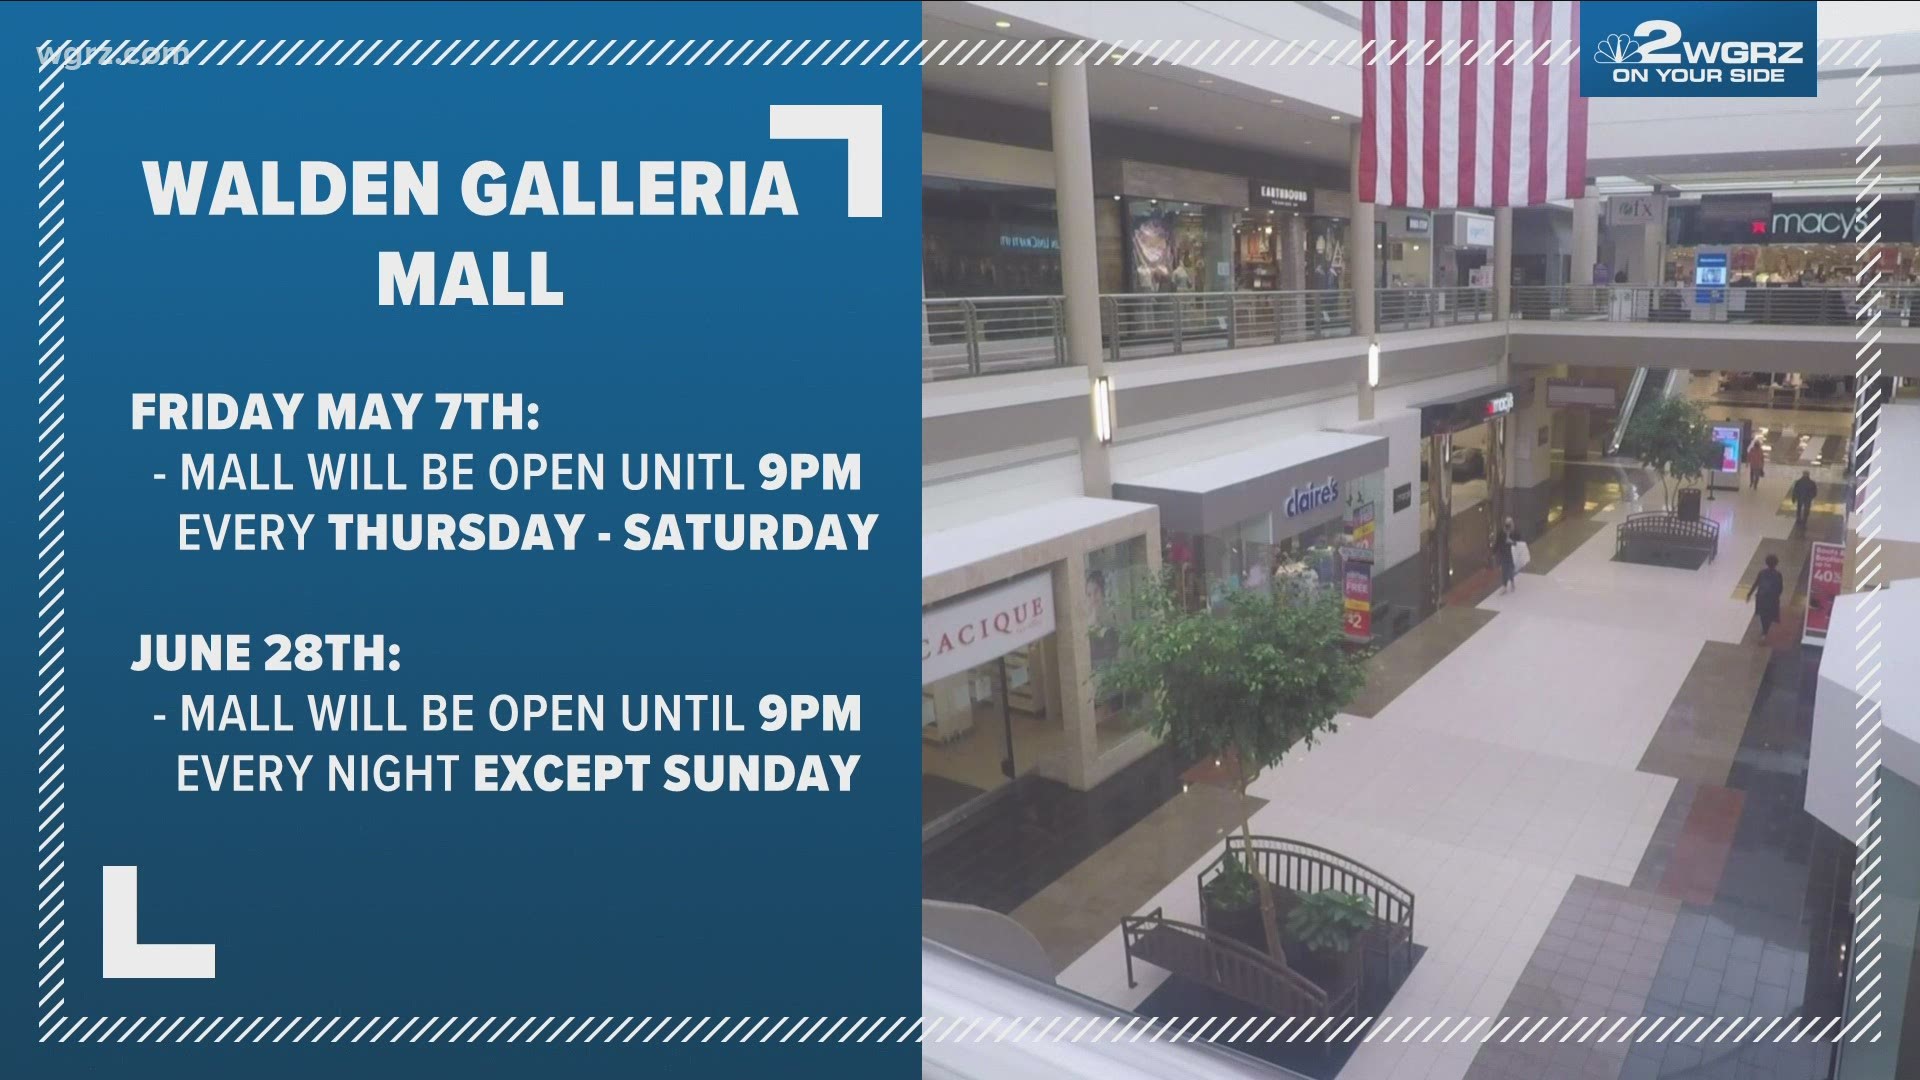 The mall will be staying open until nine, every Thursday through Saturday. And then June 28th, it will be open until 9 every night except Sunday.